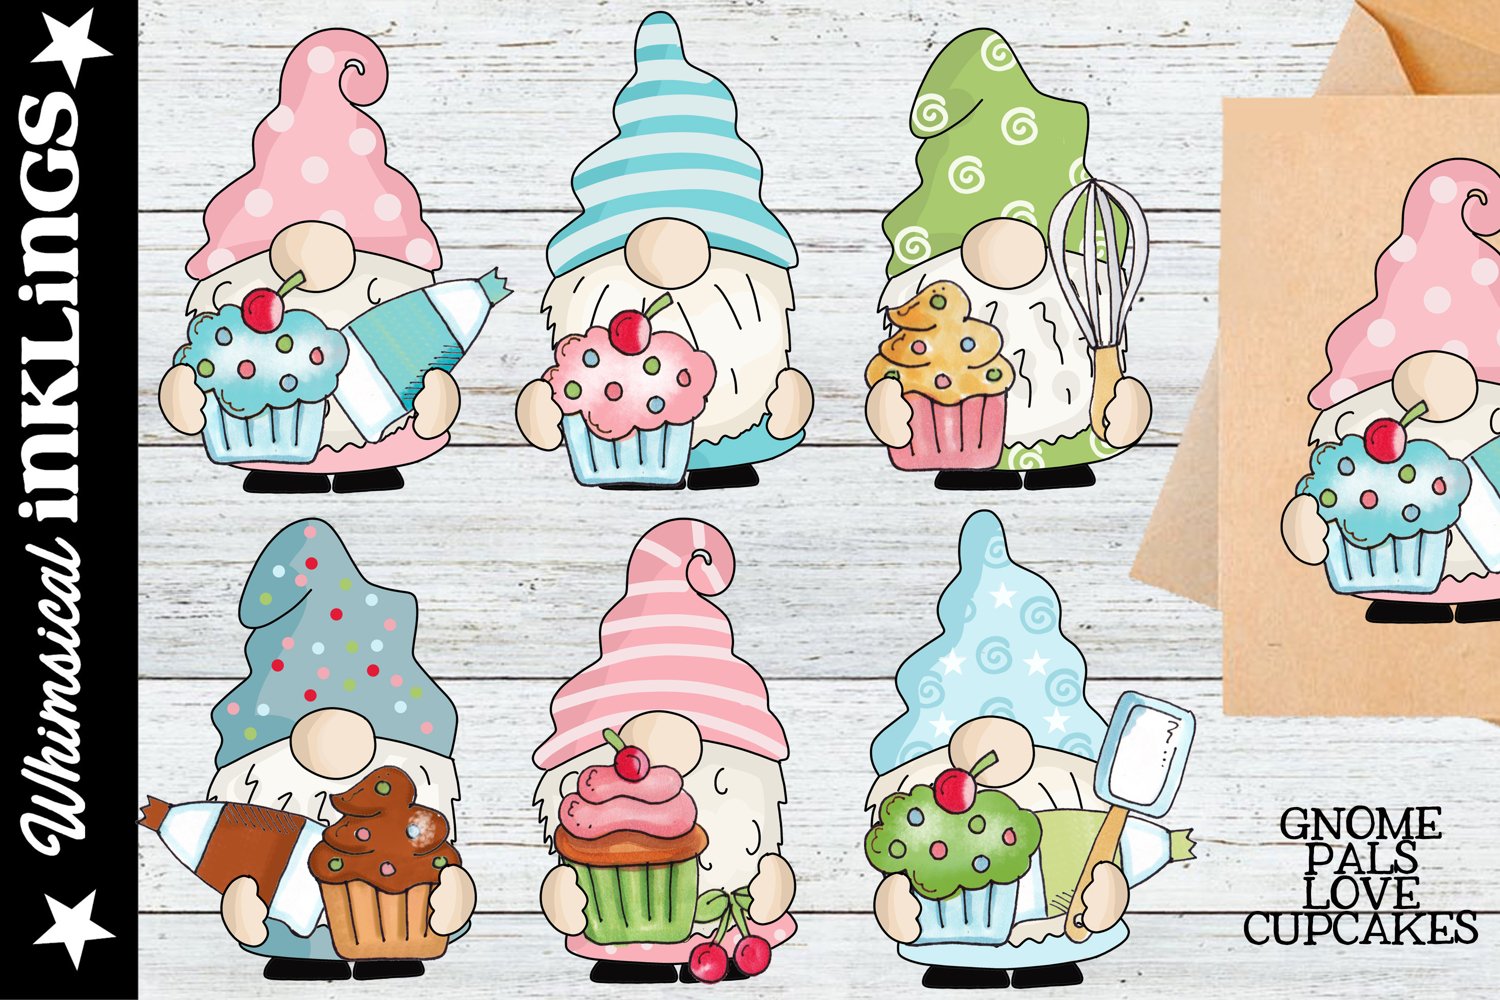 Gnome pals with cute pancakes.